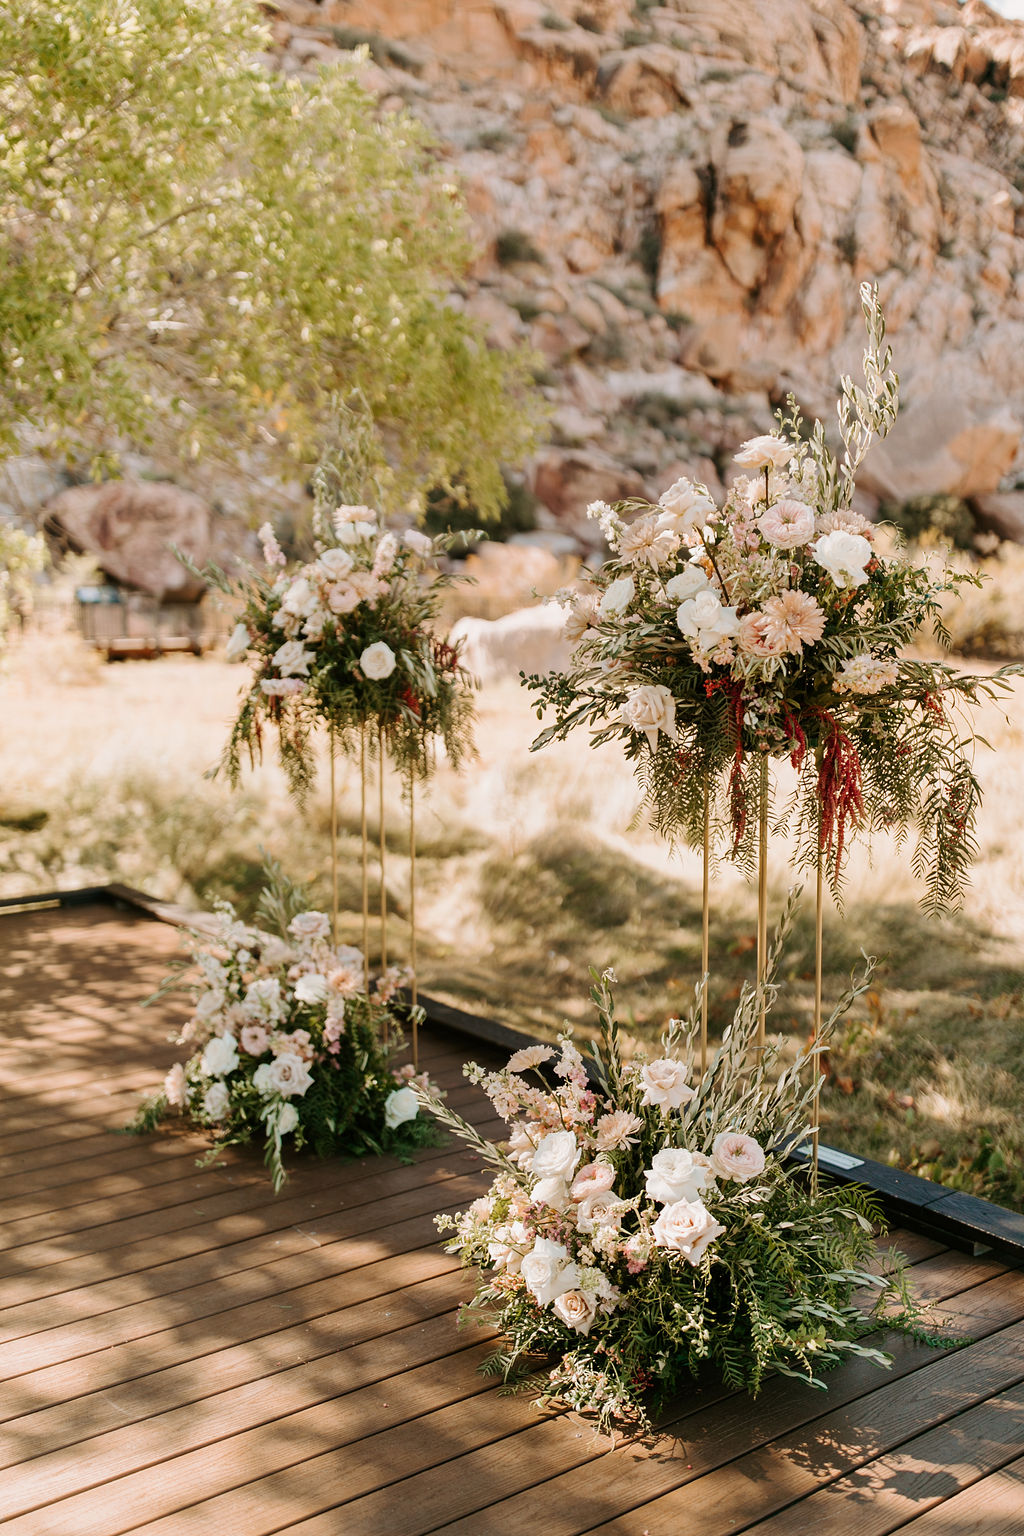 Ceremony Decor with Harlow Stands and Floral for Romantic Desert & Backyard Micro-Wedding 